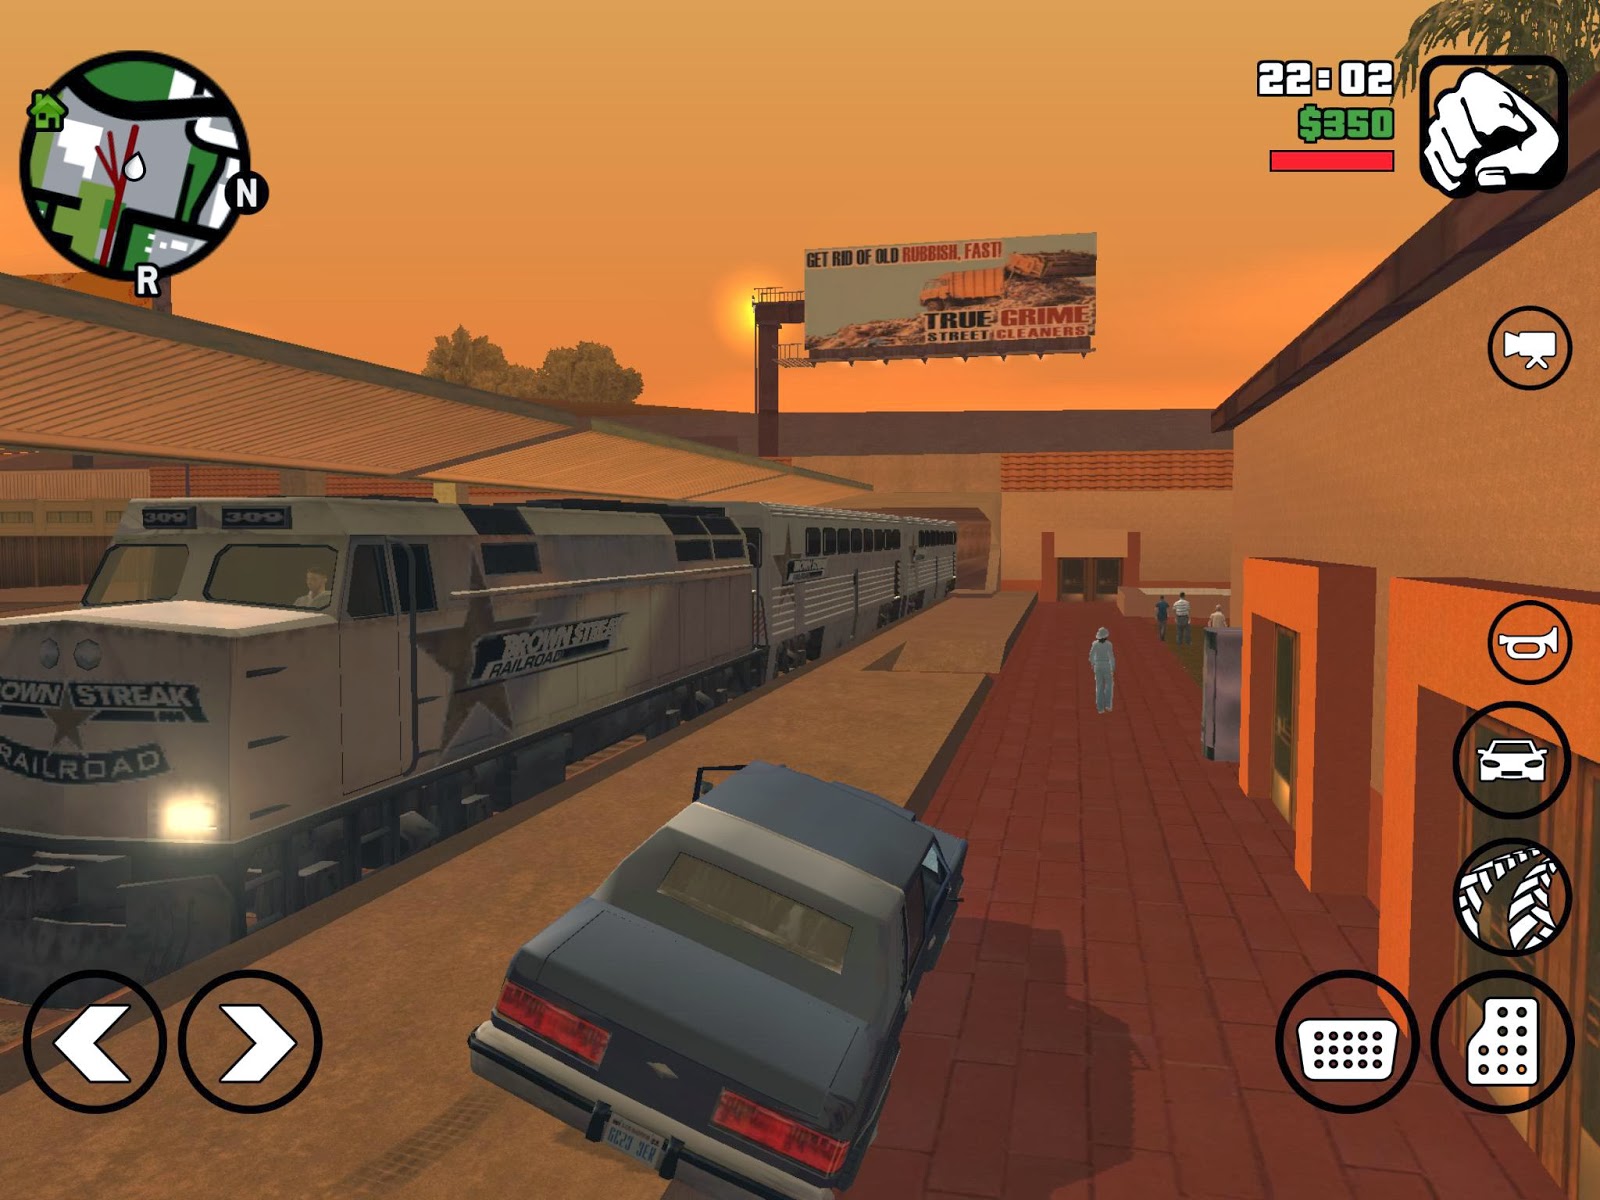 Grand Theft Auto San Andreas APK + DATA FILES Android Game